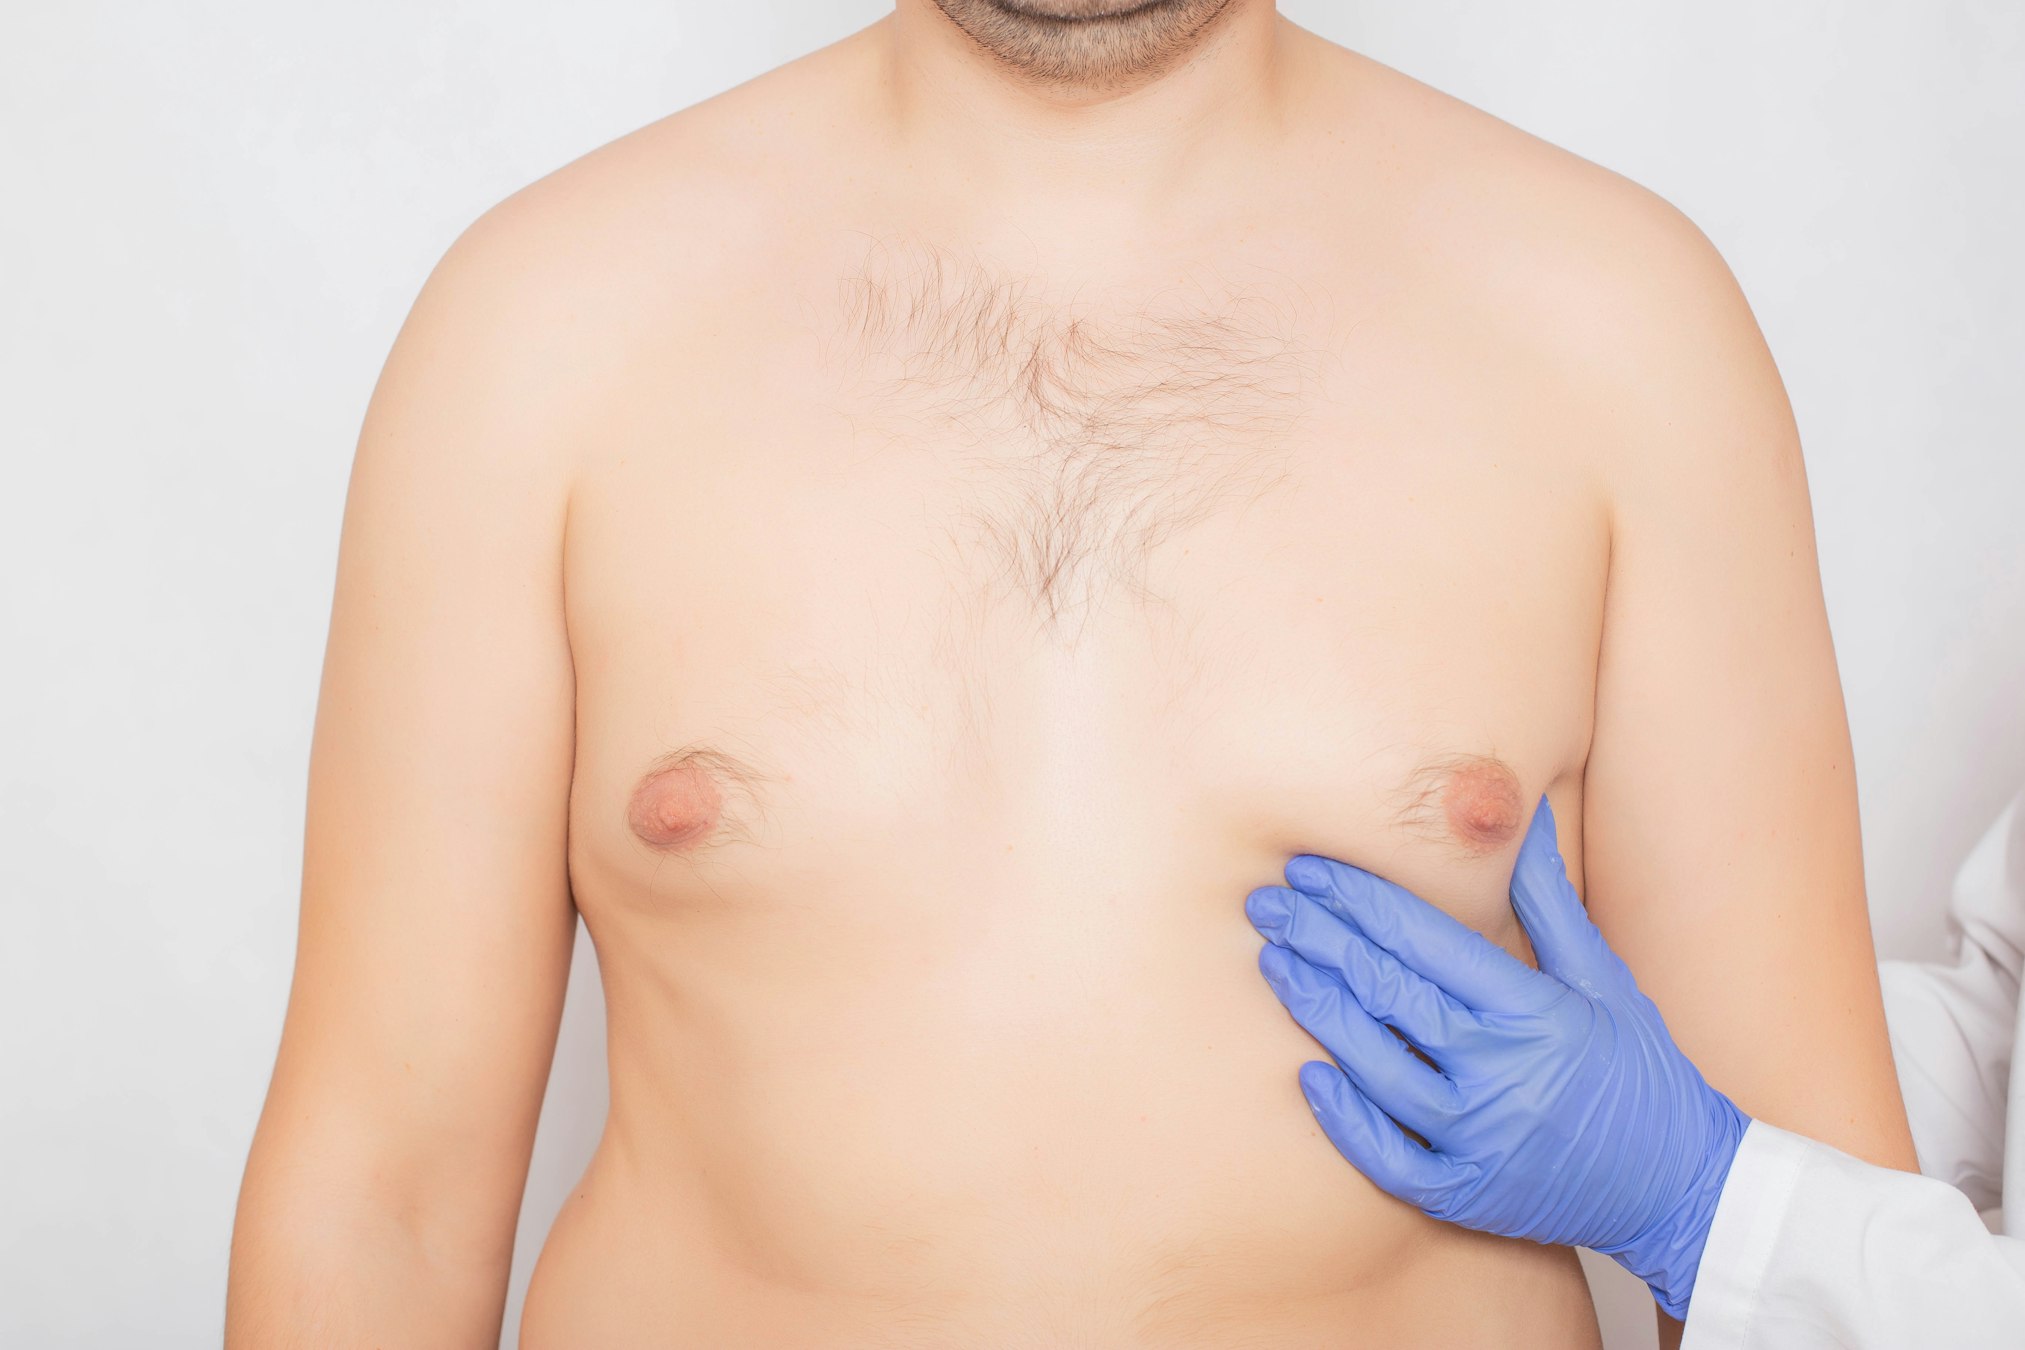 A Guide to Male Breast Reduction Surgery: 10 Crucial Things Every